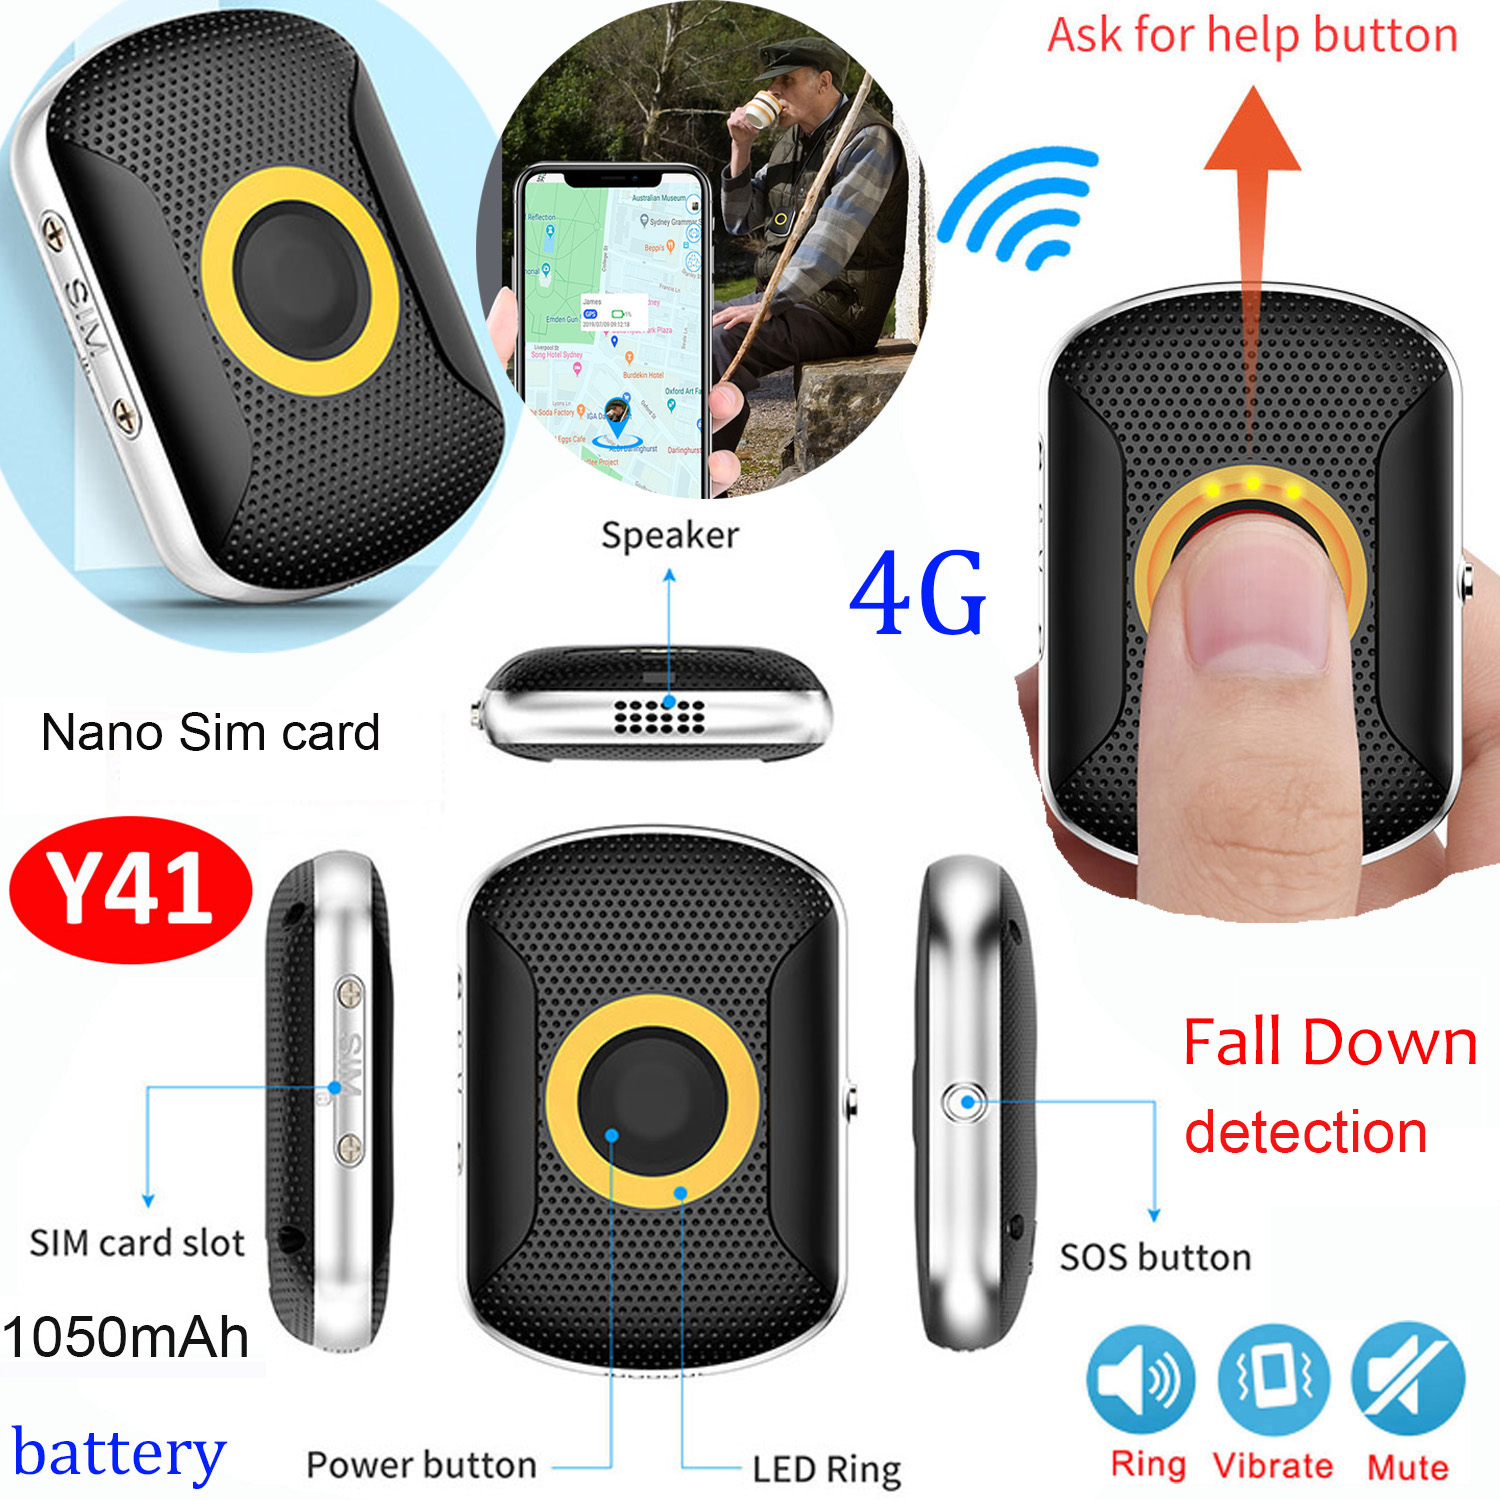 China Factory Cheap 4G IP67 Waterproof Fall Down Alert Mini Smart Tracking Tracker GPS with Real-Time Google Map Positioning Y41